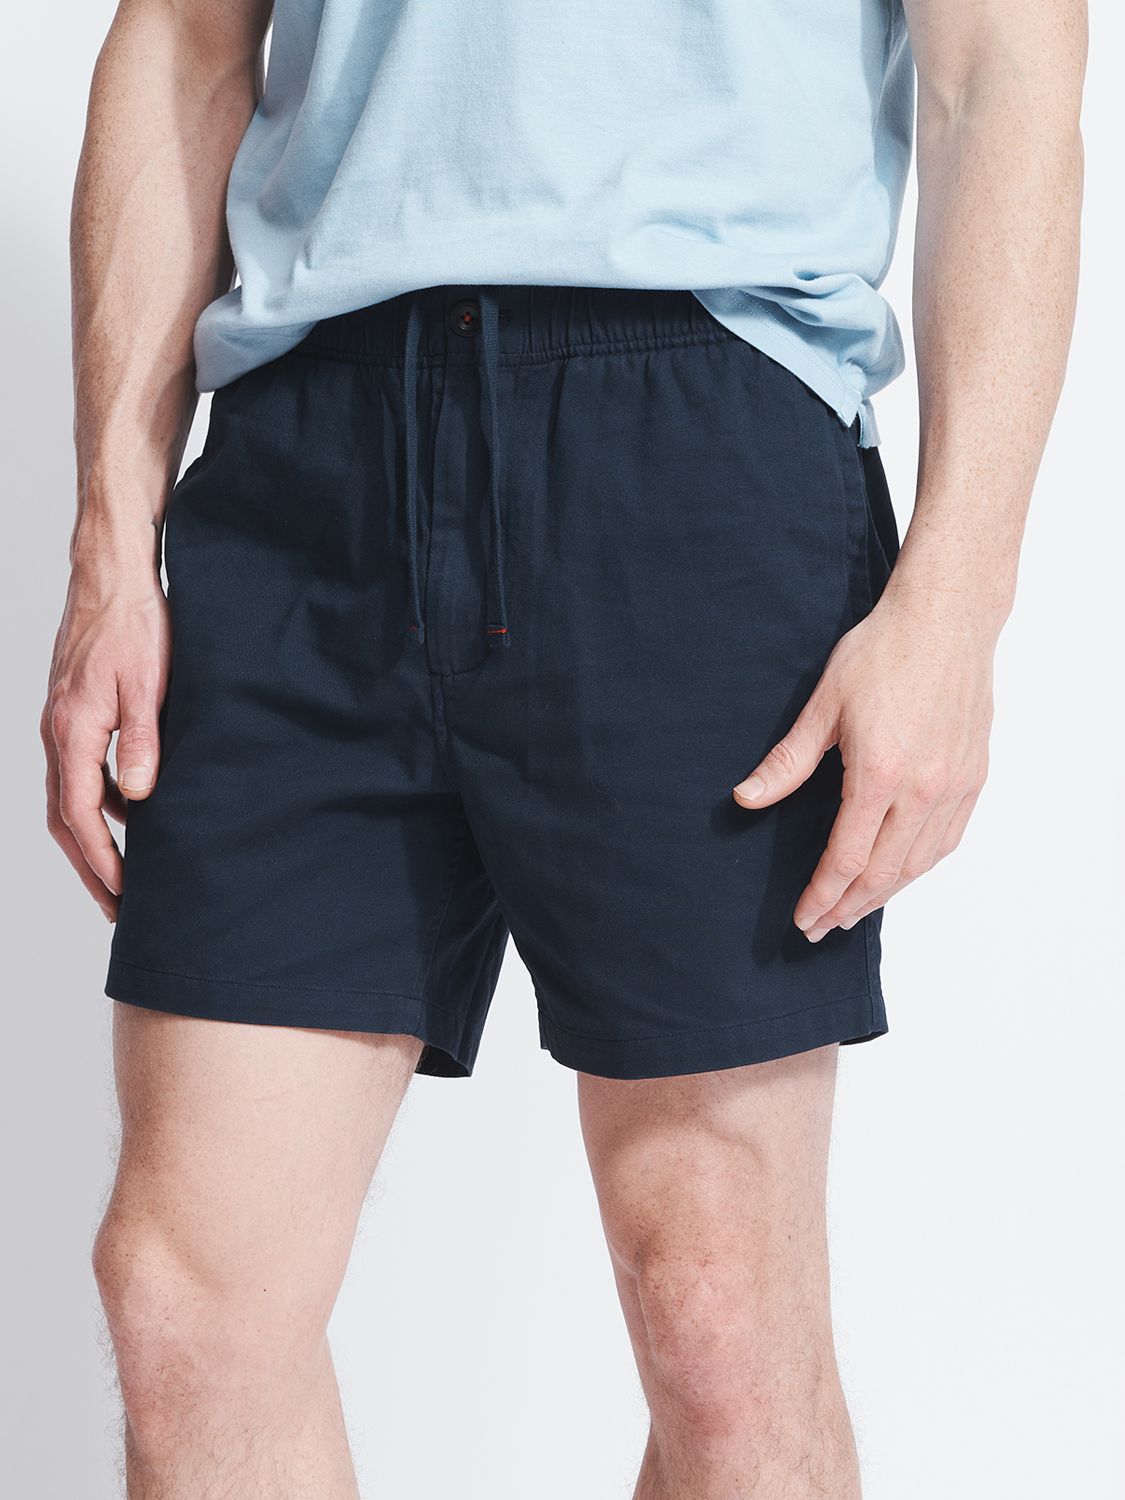 Aubin Wold Rugby Shorts, Navy at John Lewis & Partners